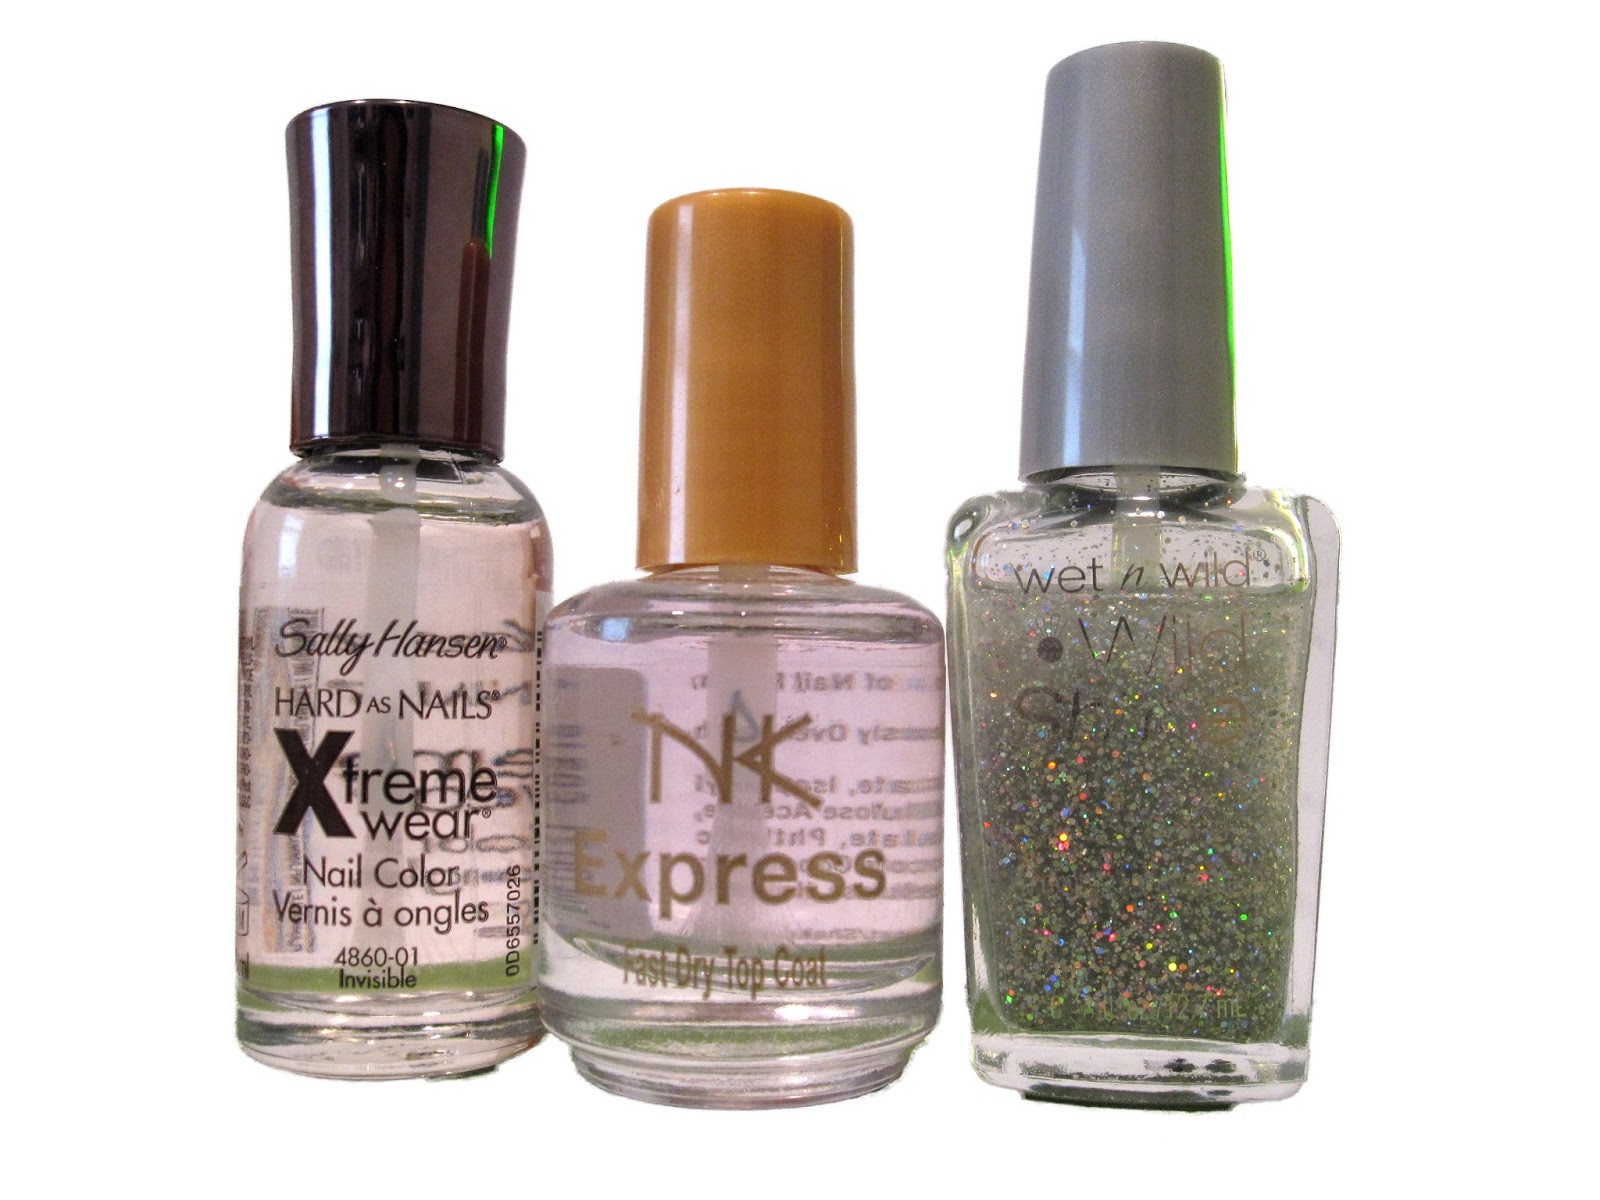 9. Sally Hansen Hard as Nails Xtreme Wear Nail Polish in "Feet on the Ground" - wide 2